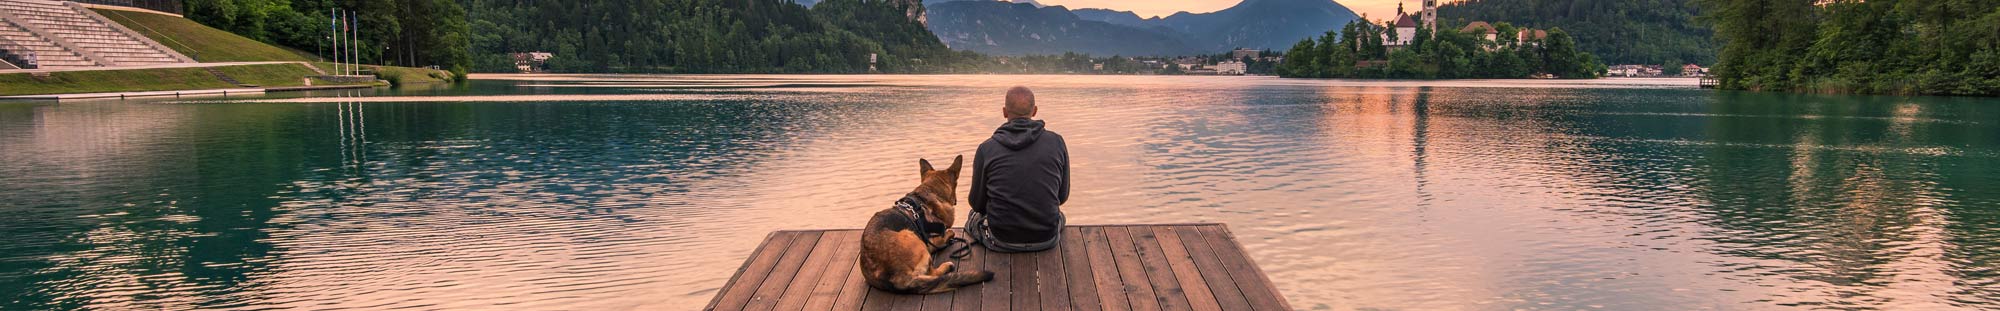 man and dog sitting on a lake dock and gazing across the water